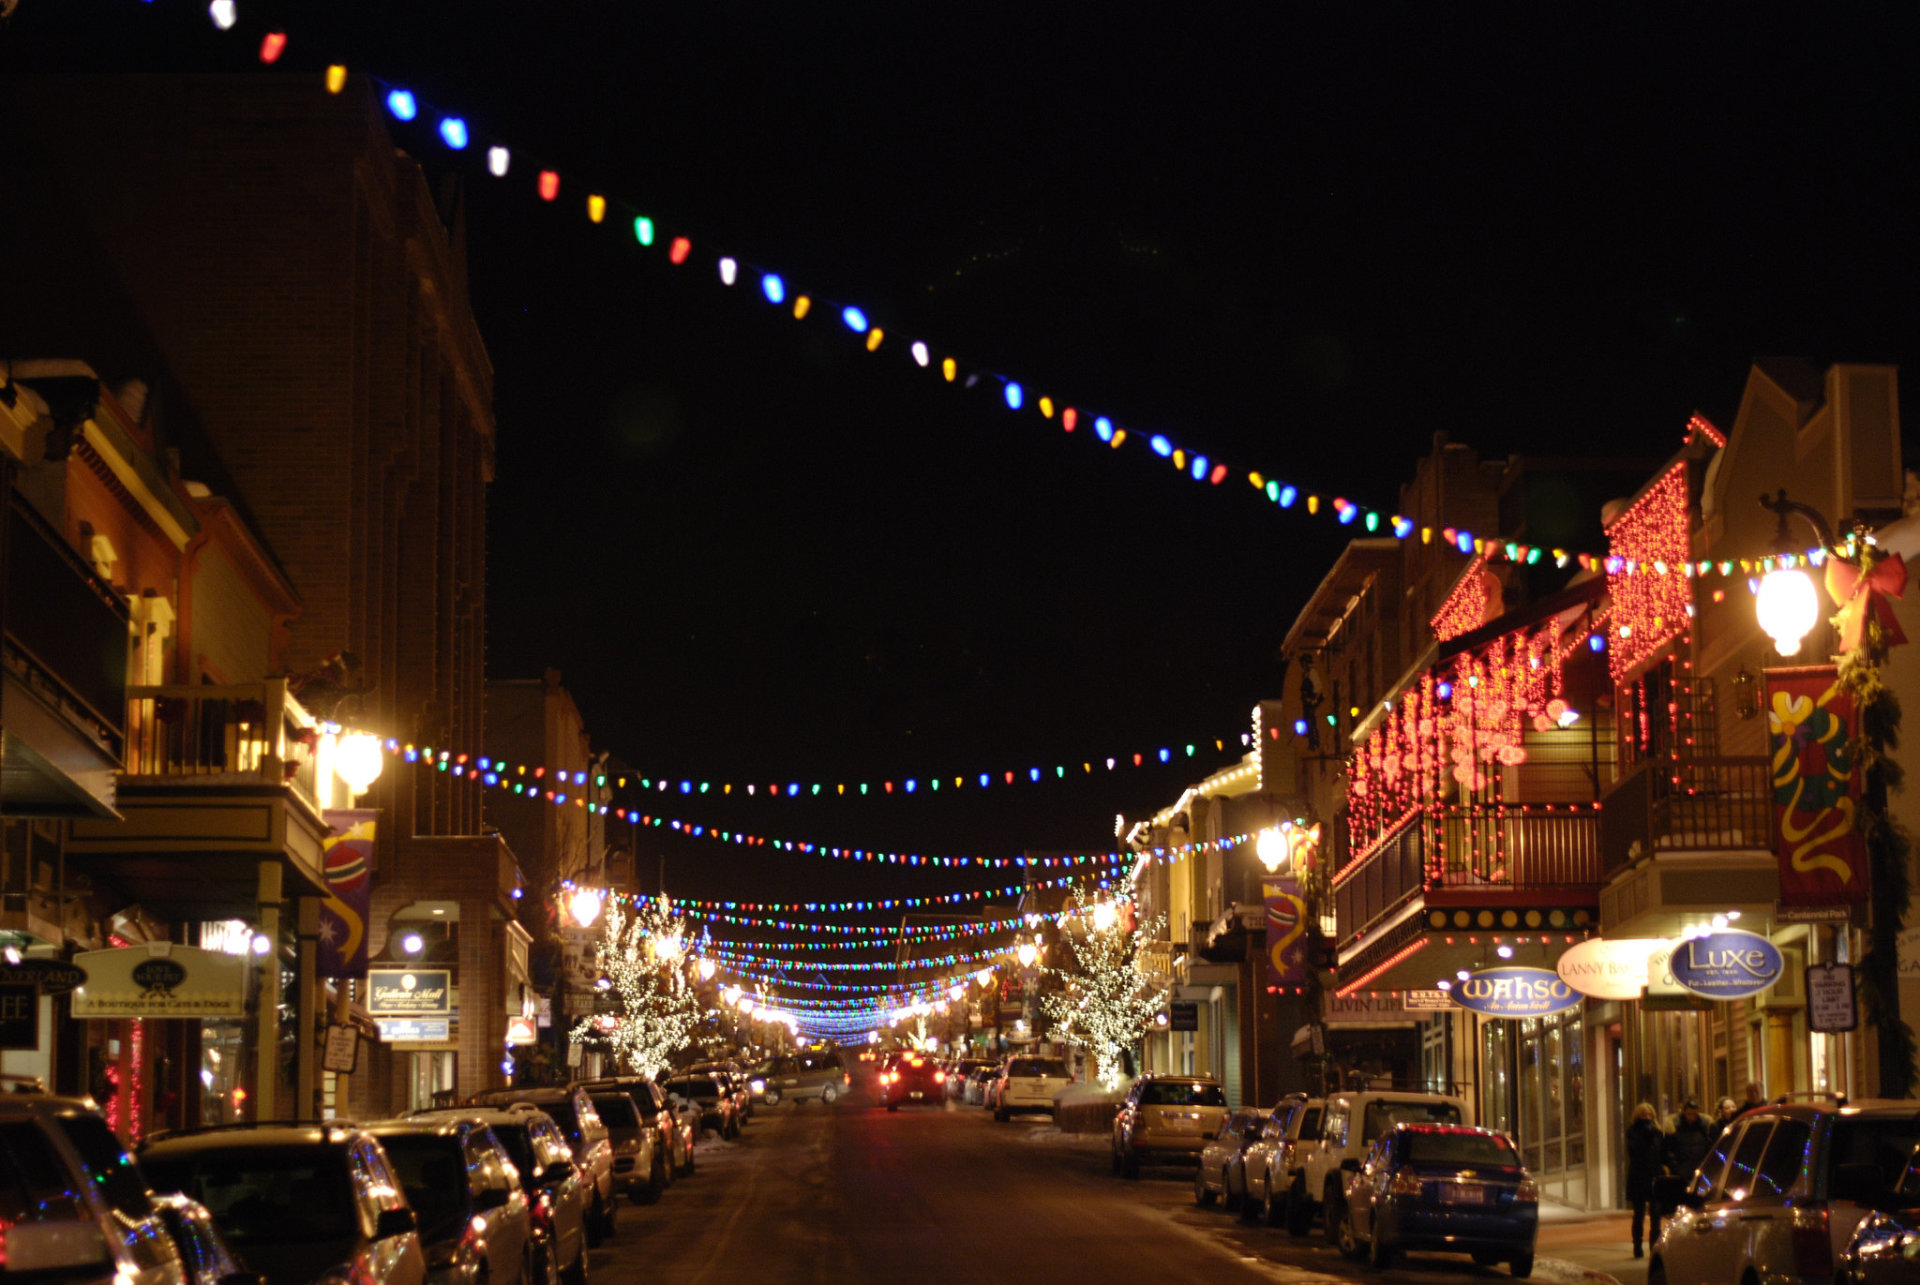 View our Christmas guide to Park City